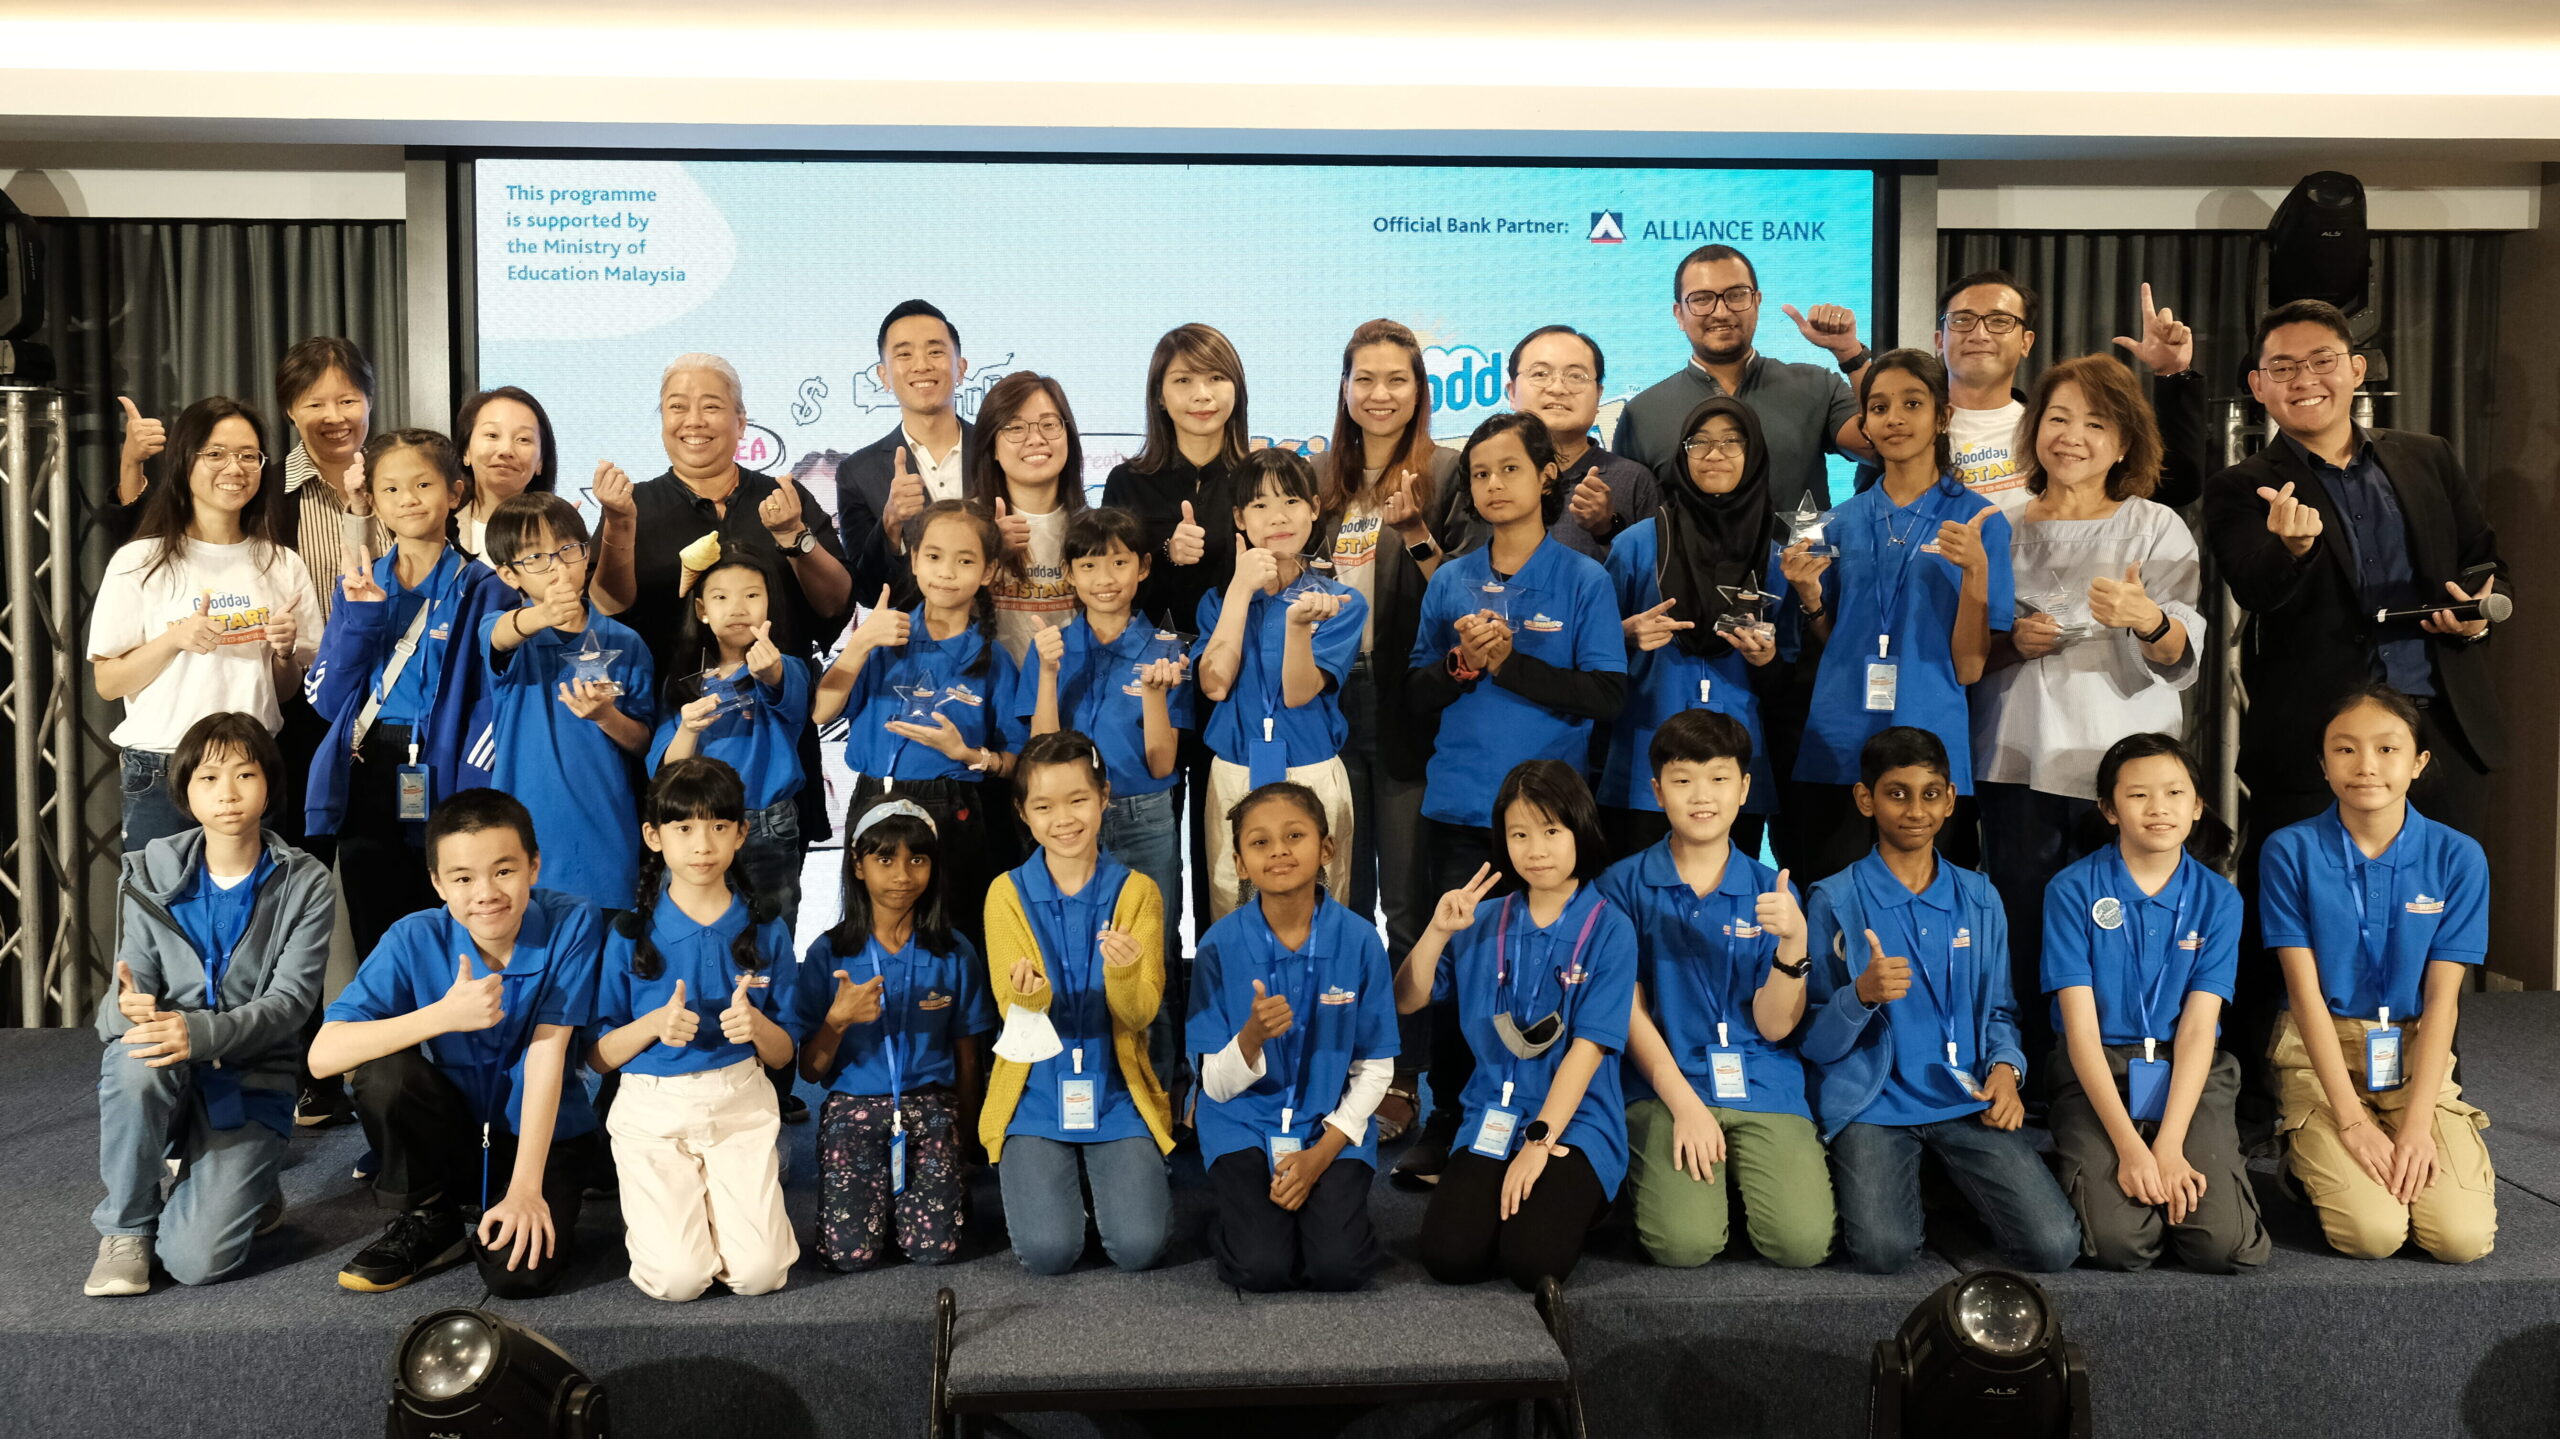 Goodday KidSTART 2.0 participants, judges, and representatives from Etika, Alliance Bank, and the Ministry of Education